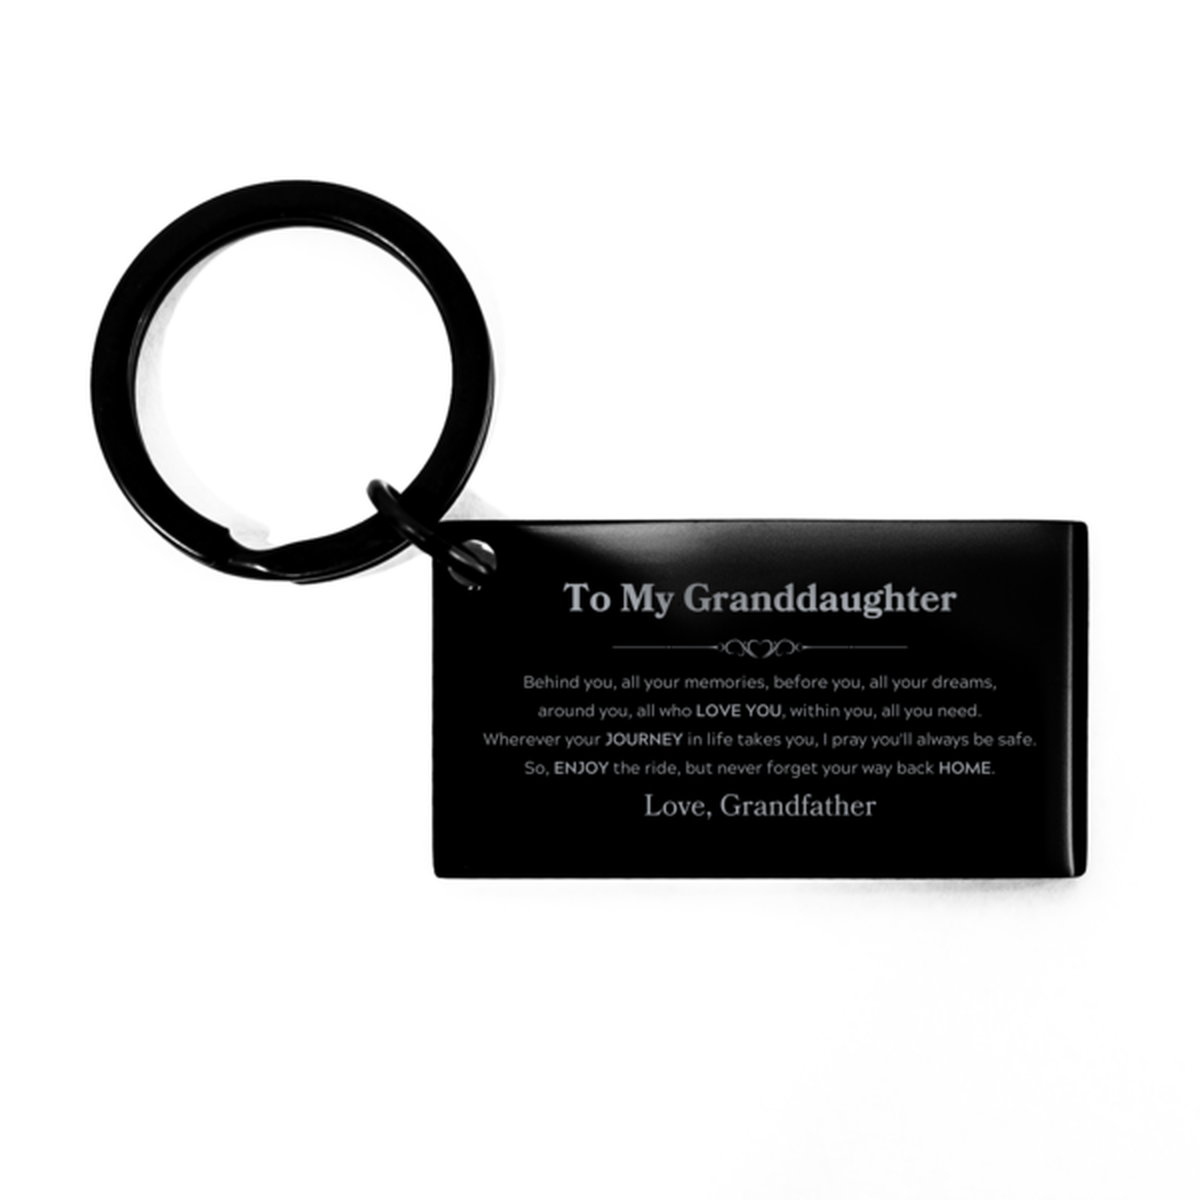 To My Granddaughter Graduation Gifts from Grandfather, Granddaughter Keychain Christmas Birthday Gifts for Granddaughter Behind you, all your memories, before you, all your dreams. Love, Grandfather